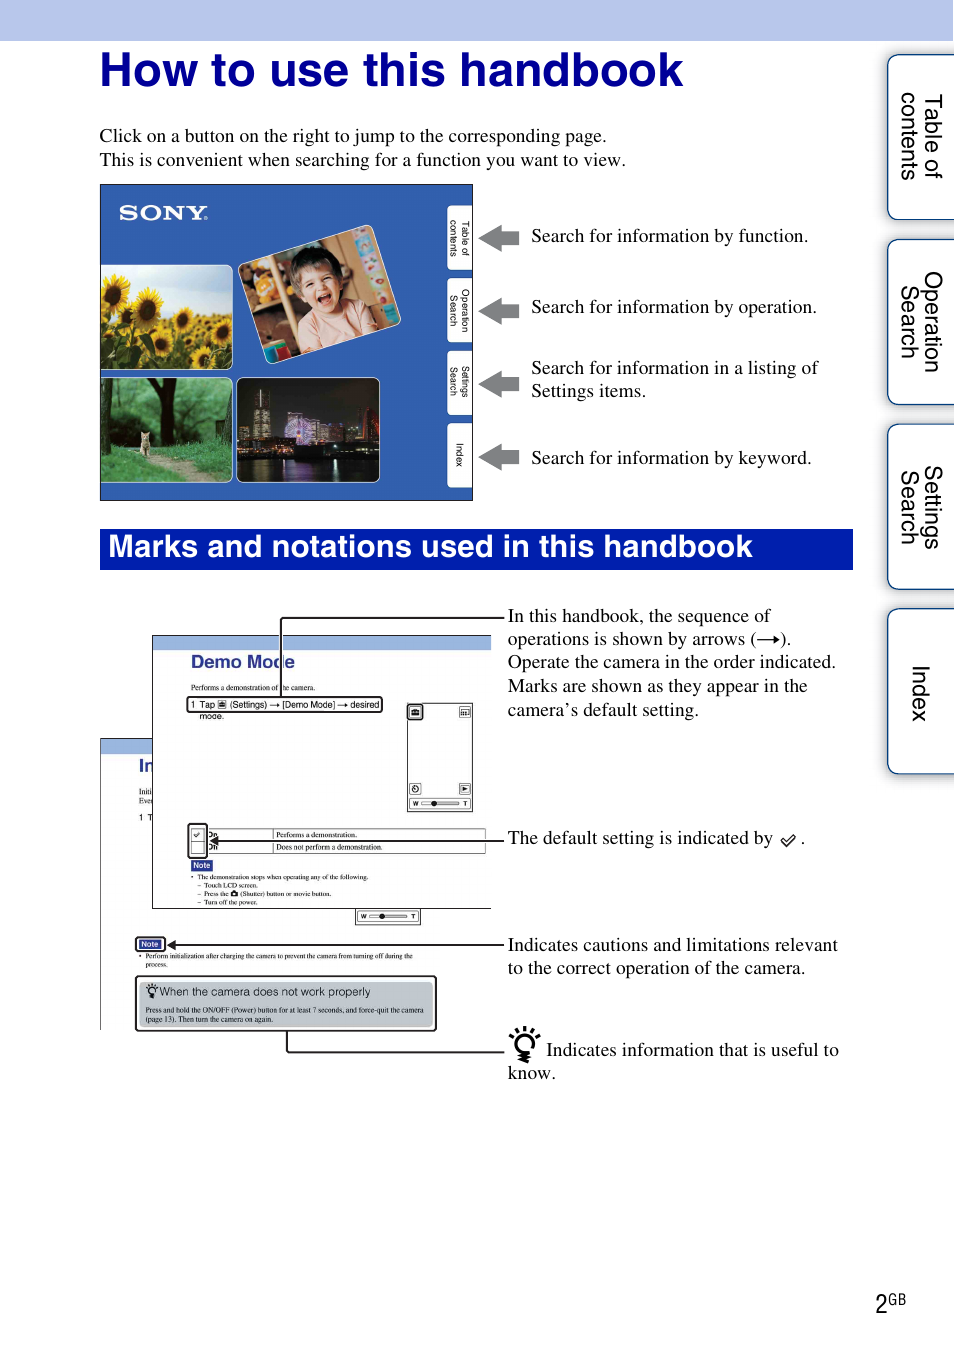 How to use this handbook, Marks and notations used in this handbook | Sony bloggie MHS-TS20К User Manual | Page 2 / 73